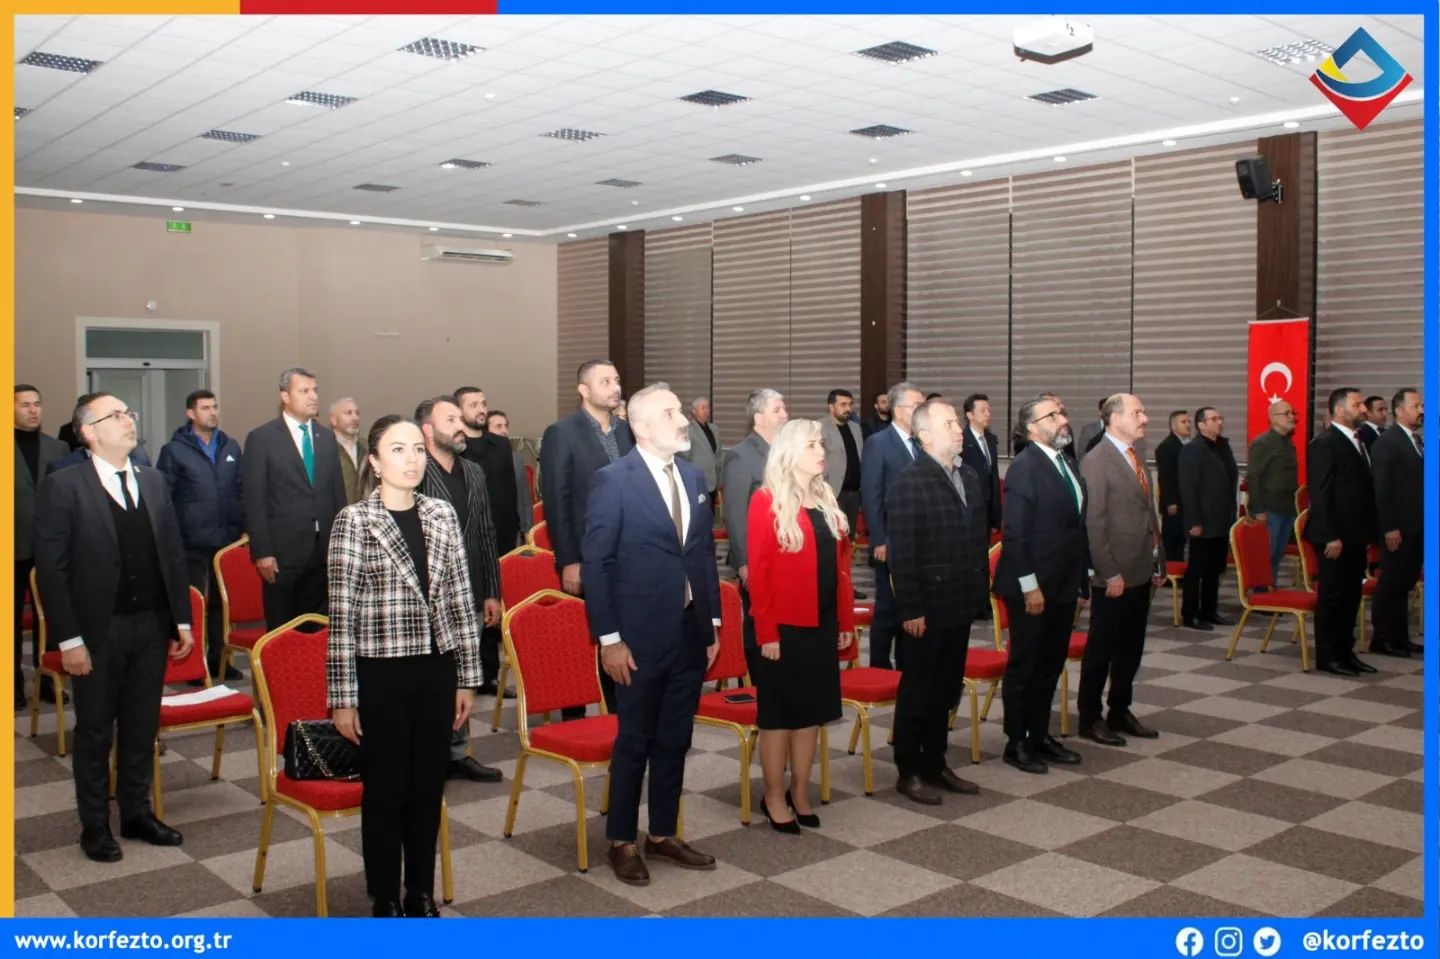 NOVEMBER ASSEMBLY MEETING HAS BEEN HELD AT THE KÖRFEZ CHAMBER OF COMMERCE